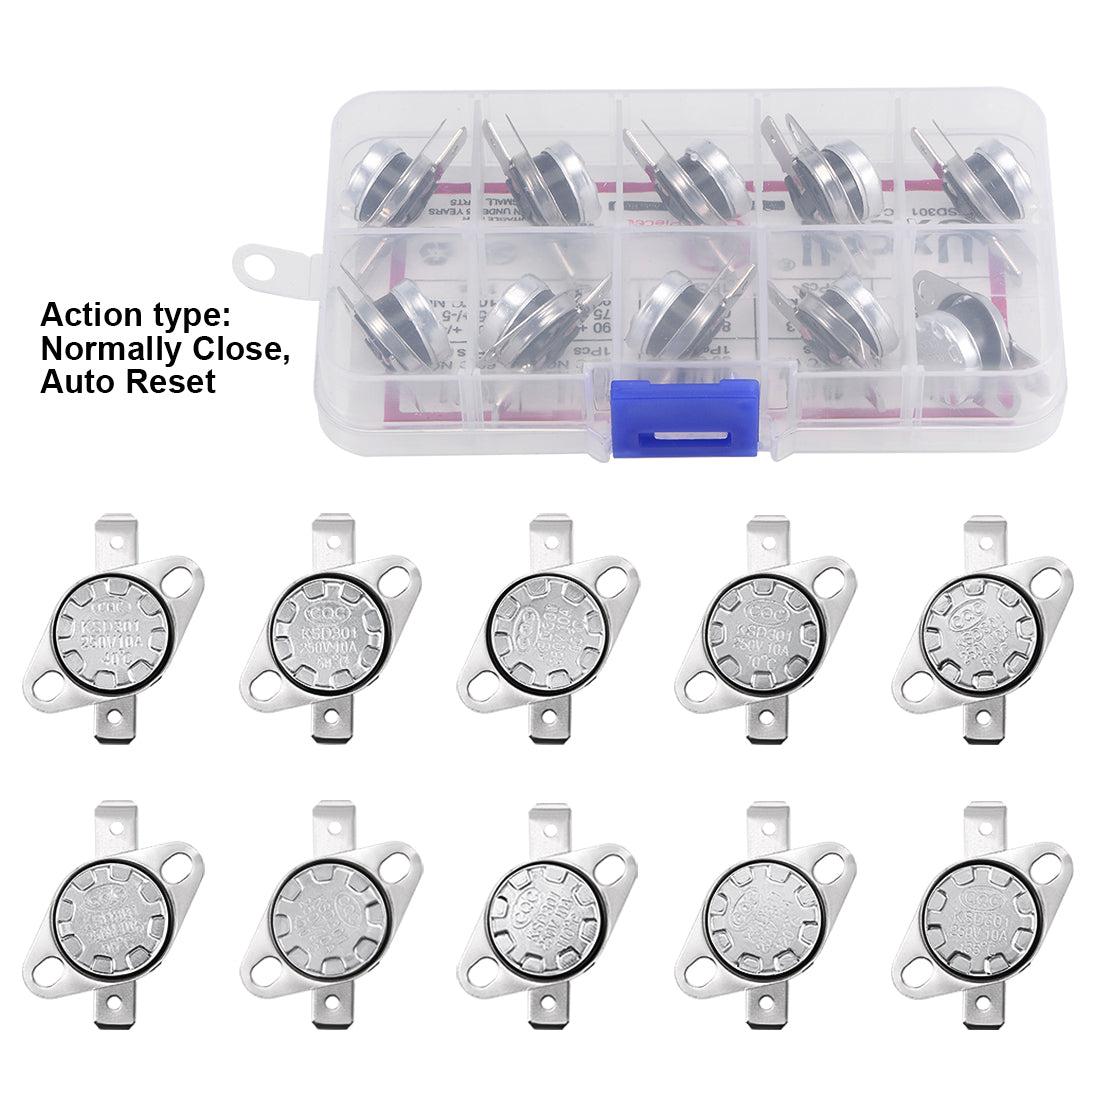 uxcell Uxcell 10pcs NC KSD301 Thermostat 40-135°C(104-275°F) Temperature Thermal Control Switch 40 50 60 70 80 90 100 110 120 135°C Normally Close Assortment Kit